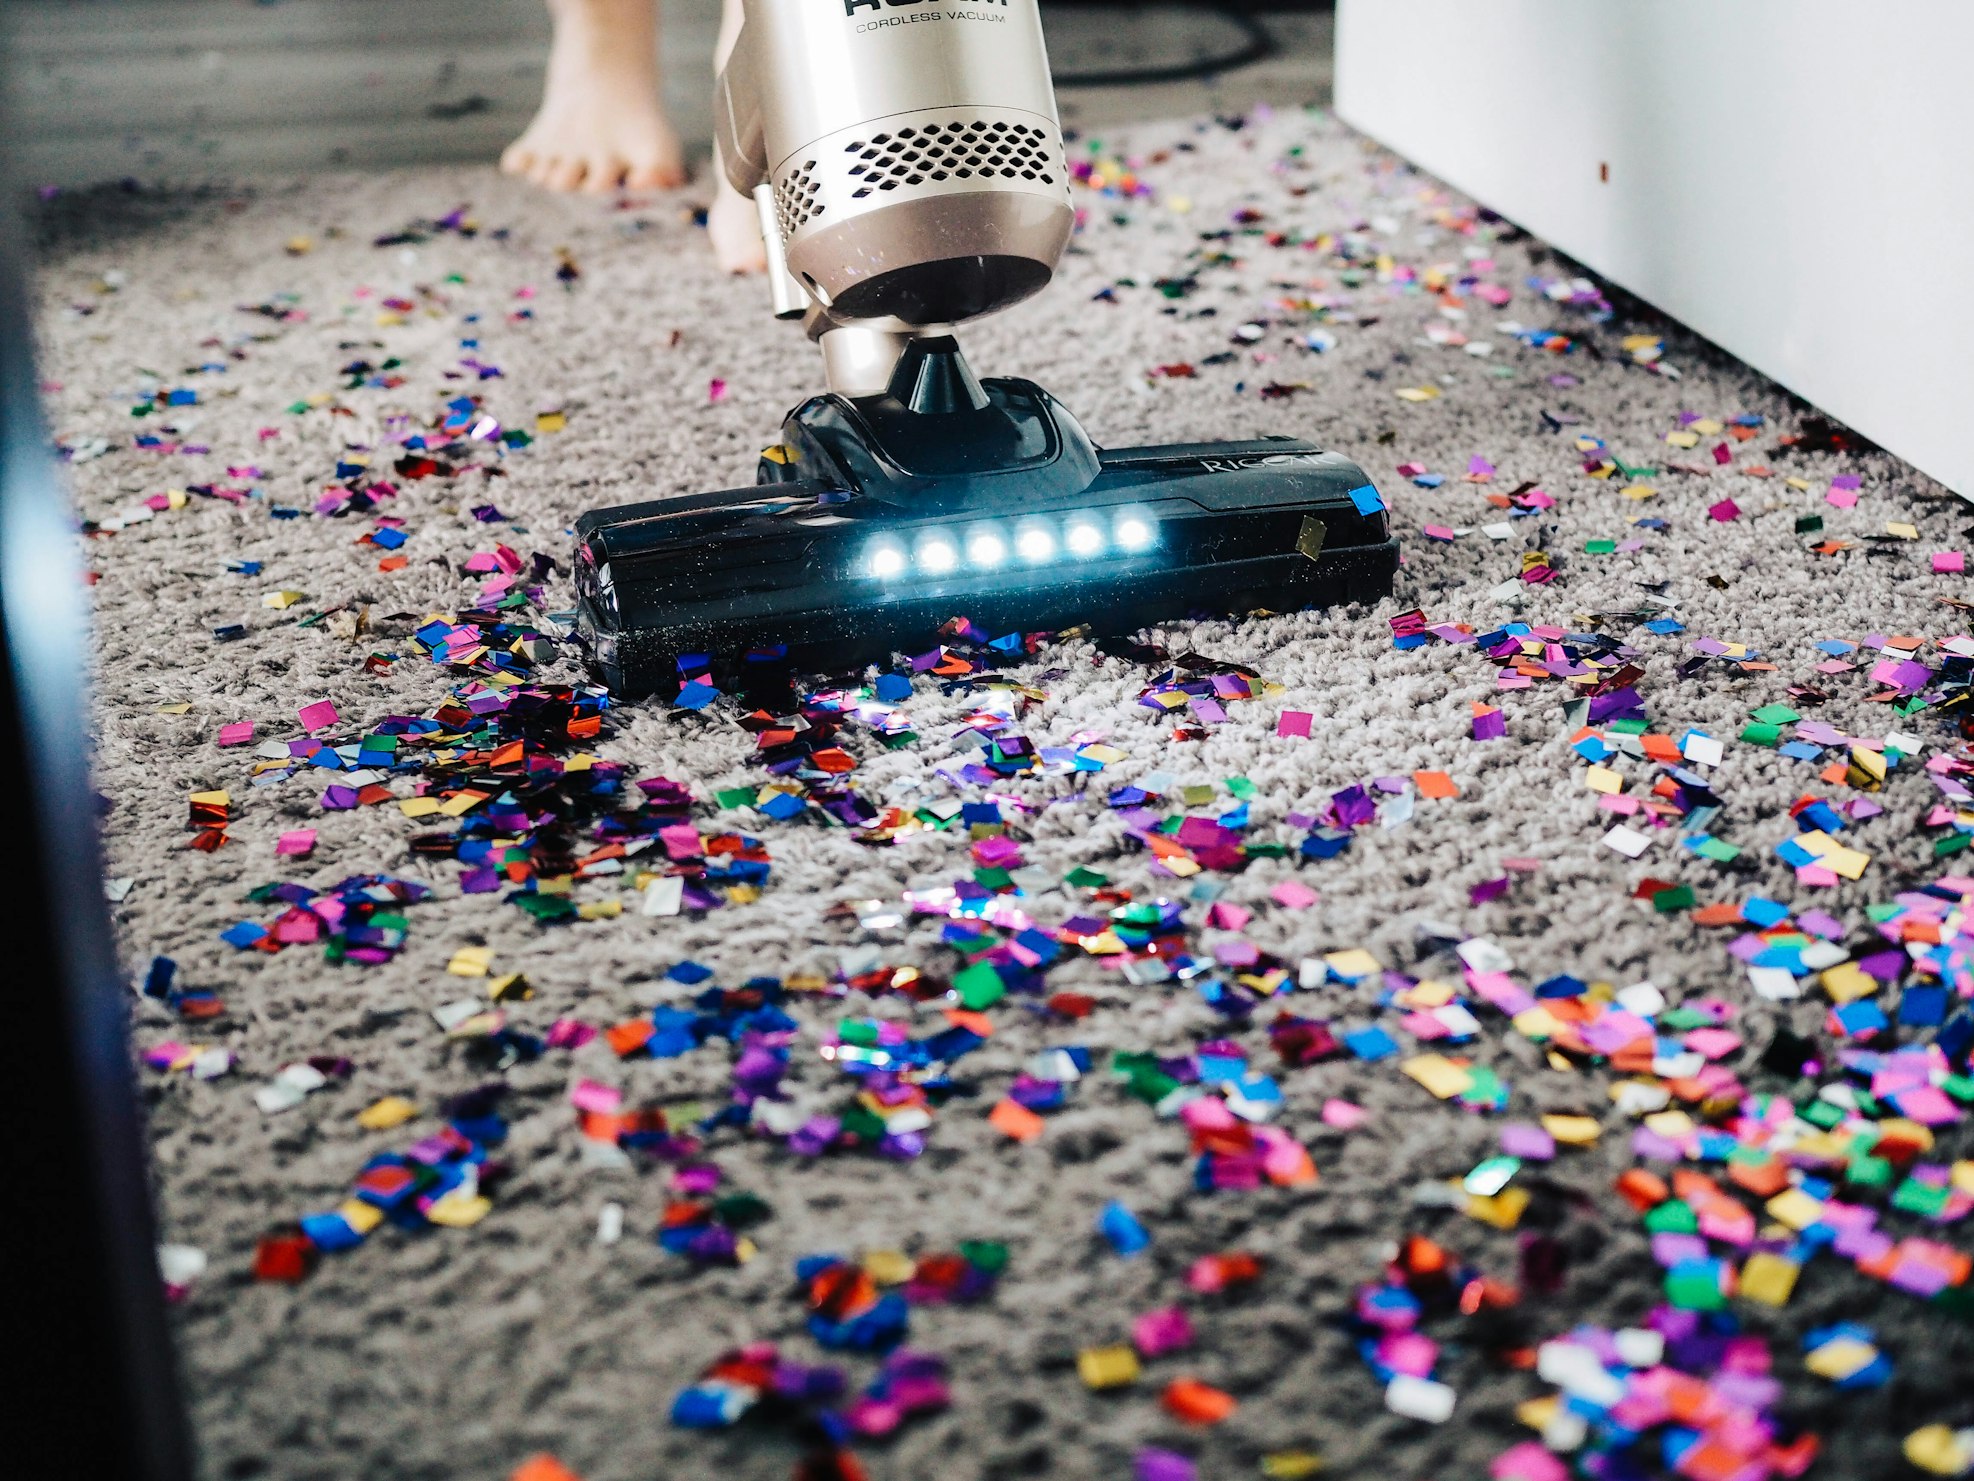 Professional Carpet Cleaning vs. DIY: Which One Is Best?